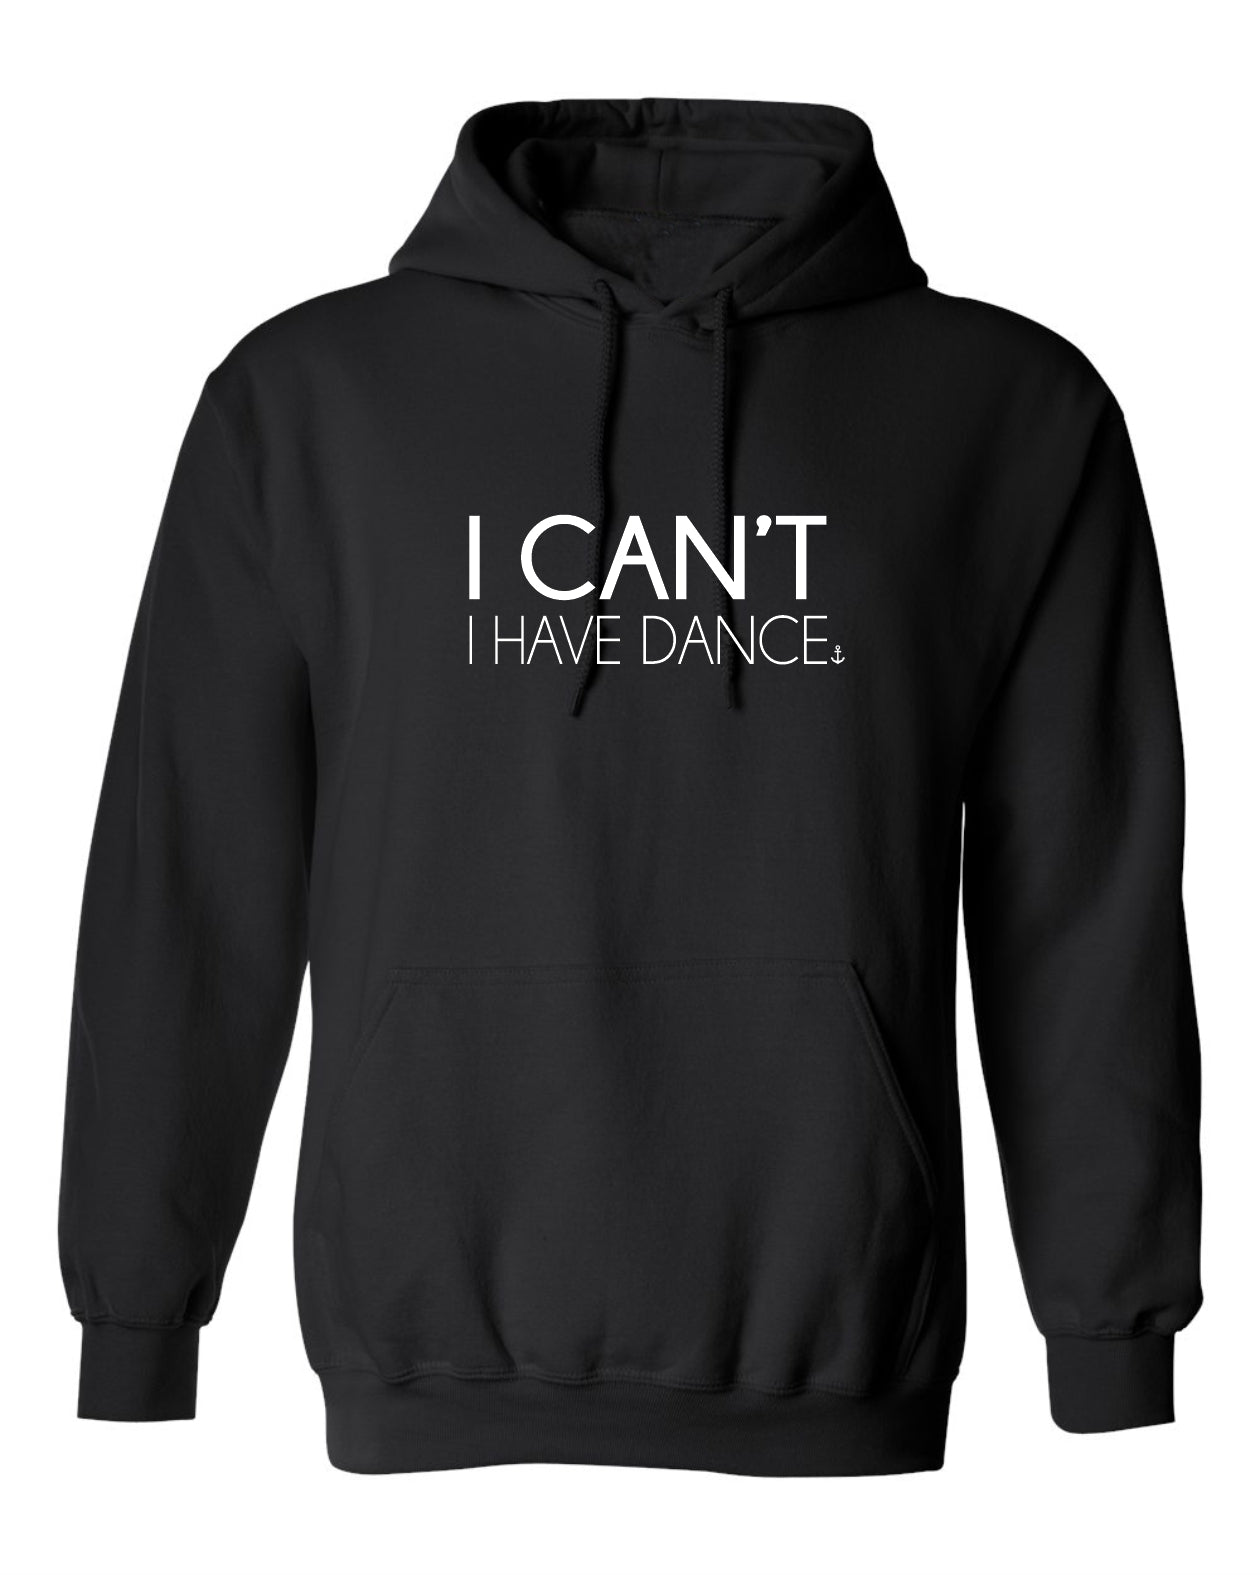 "I Can't. I Have Dance." Unisex Hoodie